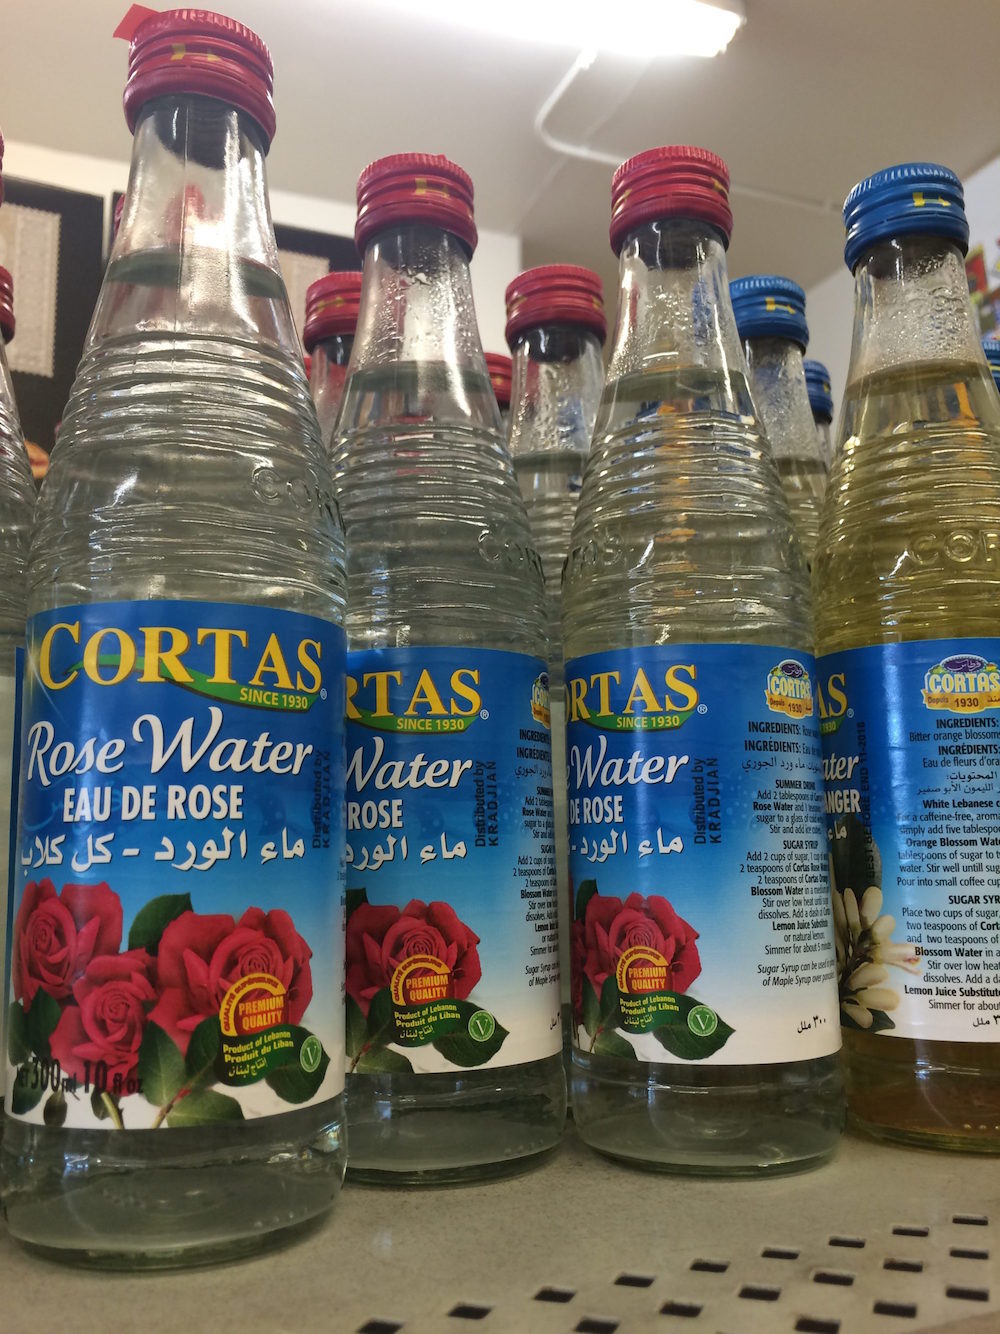 Cortas Rose Water. This is used in many Arabic desserts, often in conjunction with honey, as it intensifies the honey flavor.